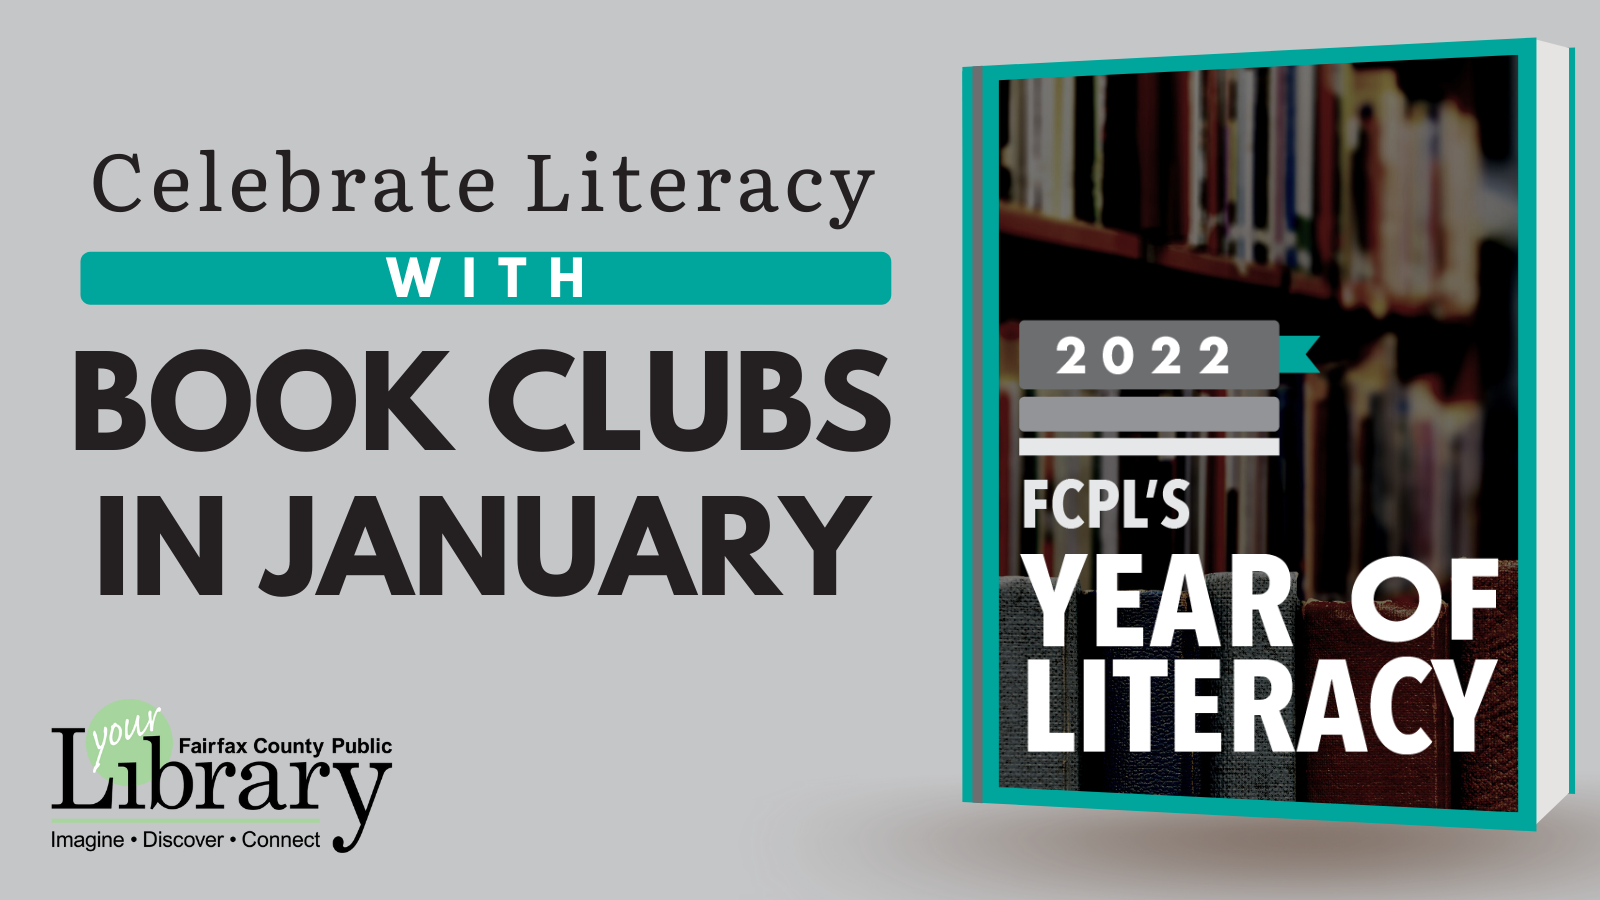 Celebrate Literacy with Book Clubs in January, 2022 FCPL Year of Literacy